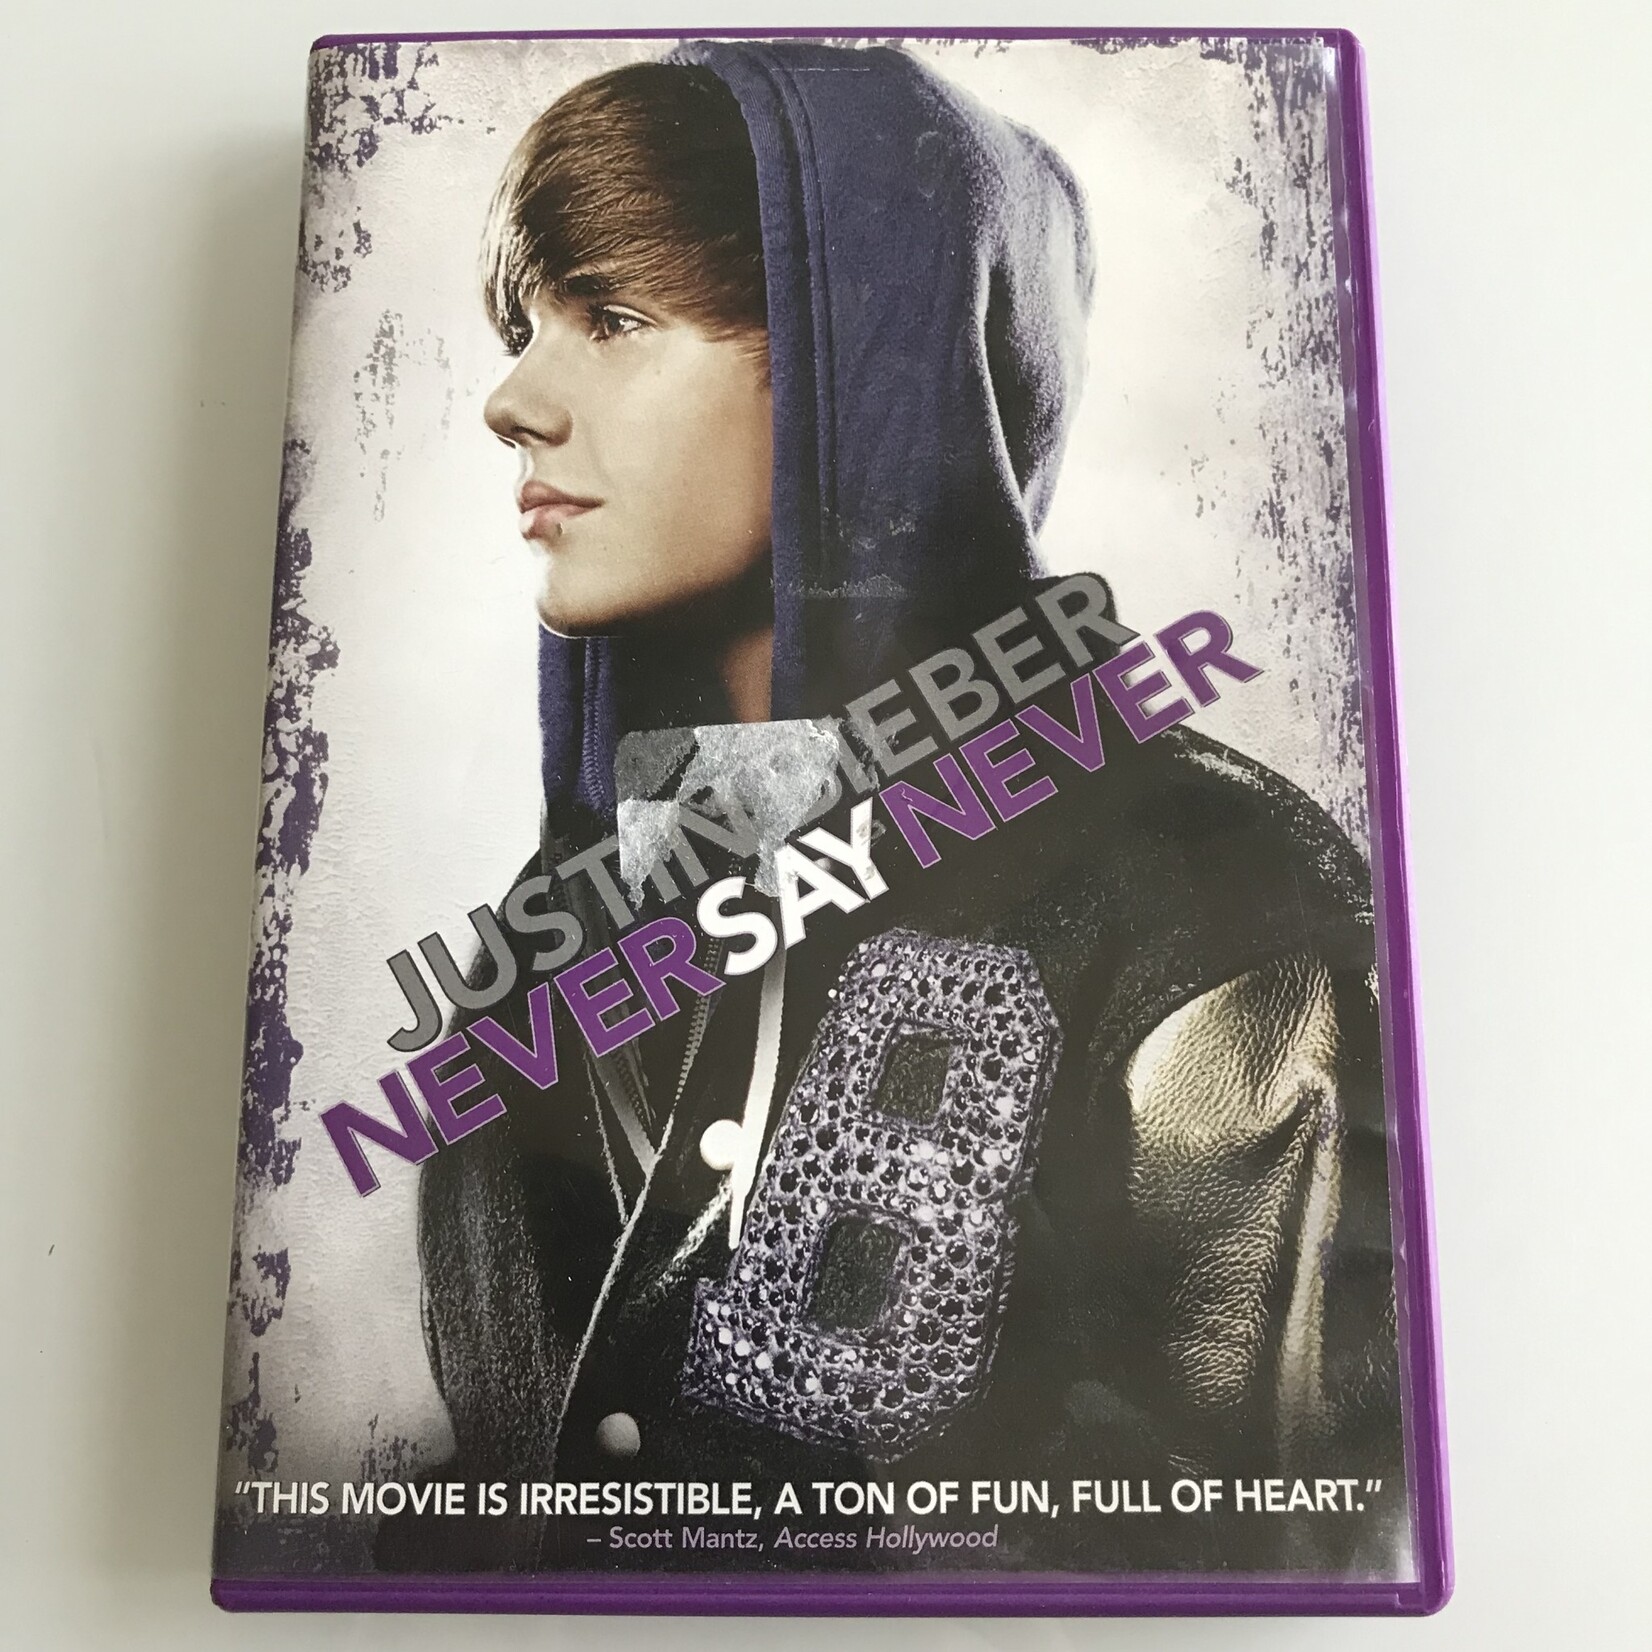 Justin Bieber - Never Say Never - DVD (USED)